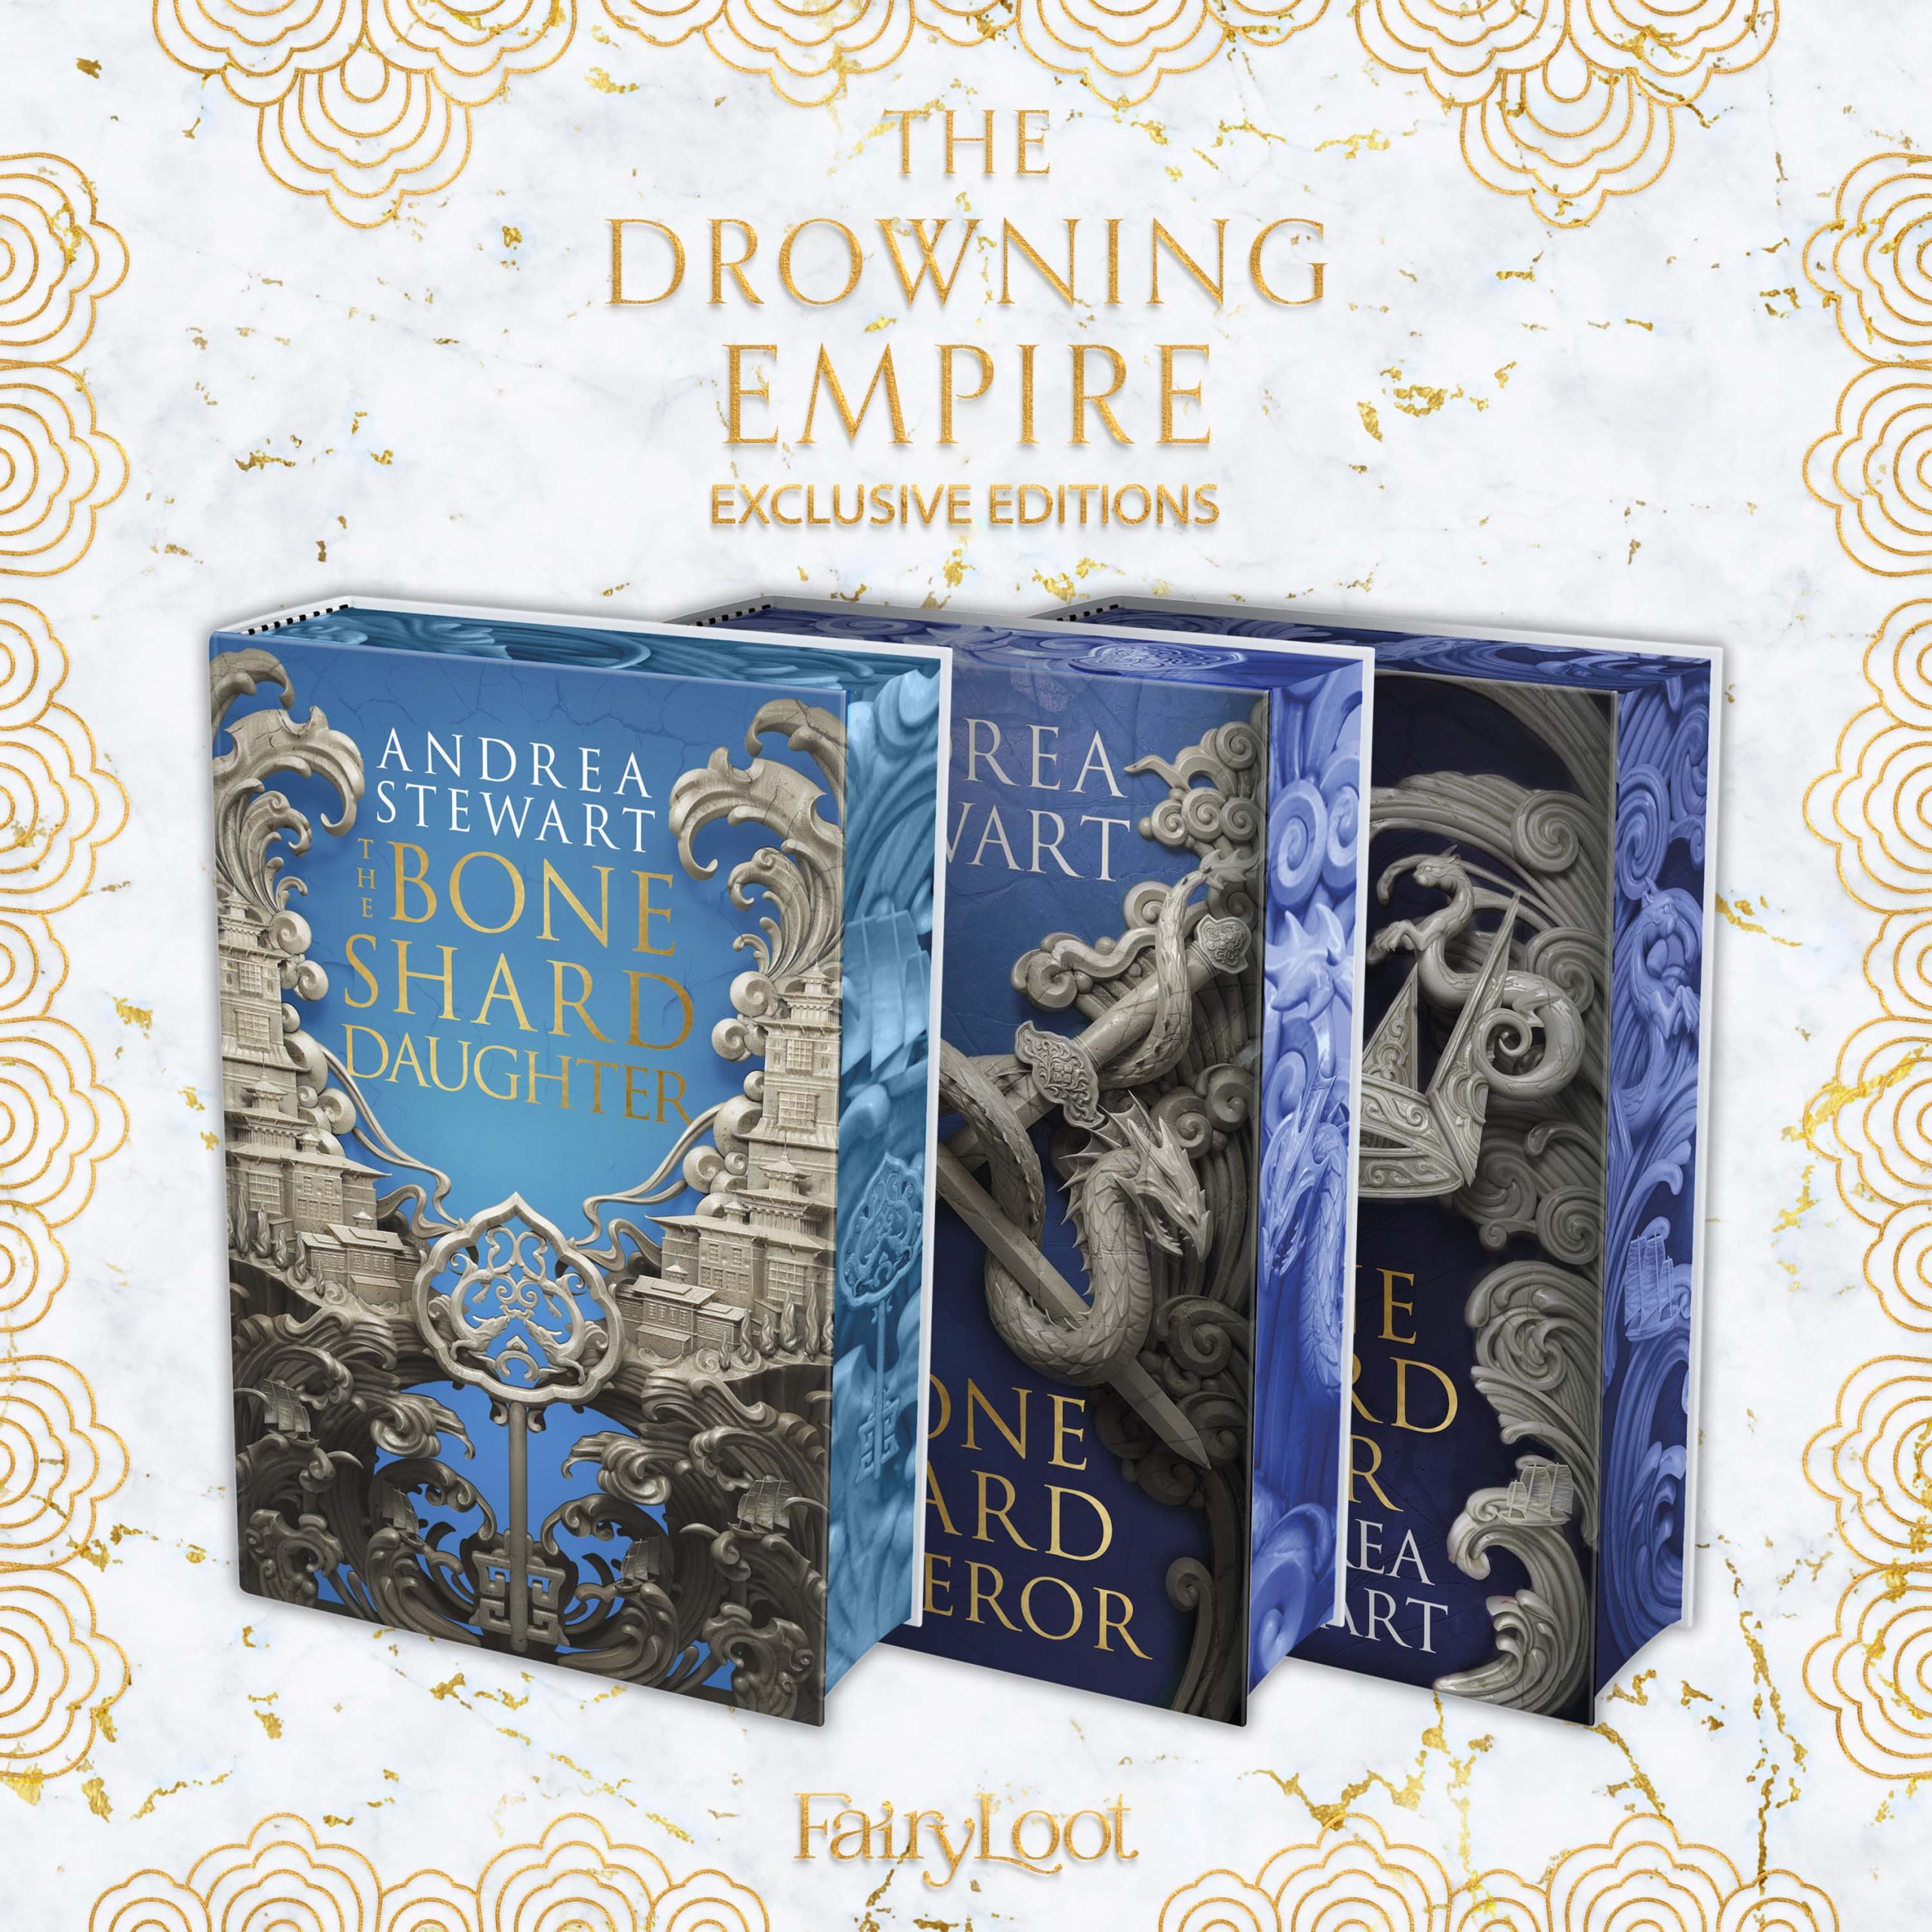 The Drowning Empire Exclusive Editions